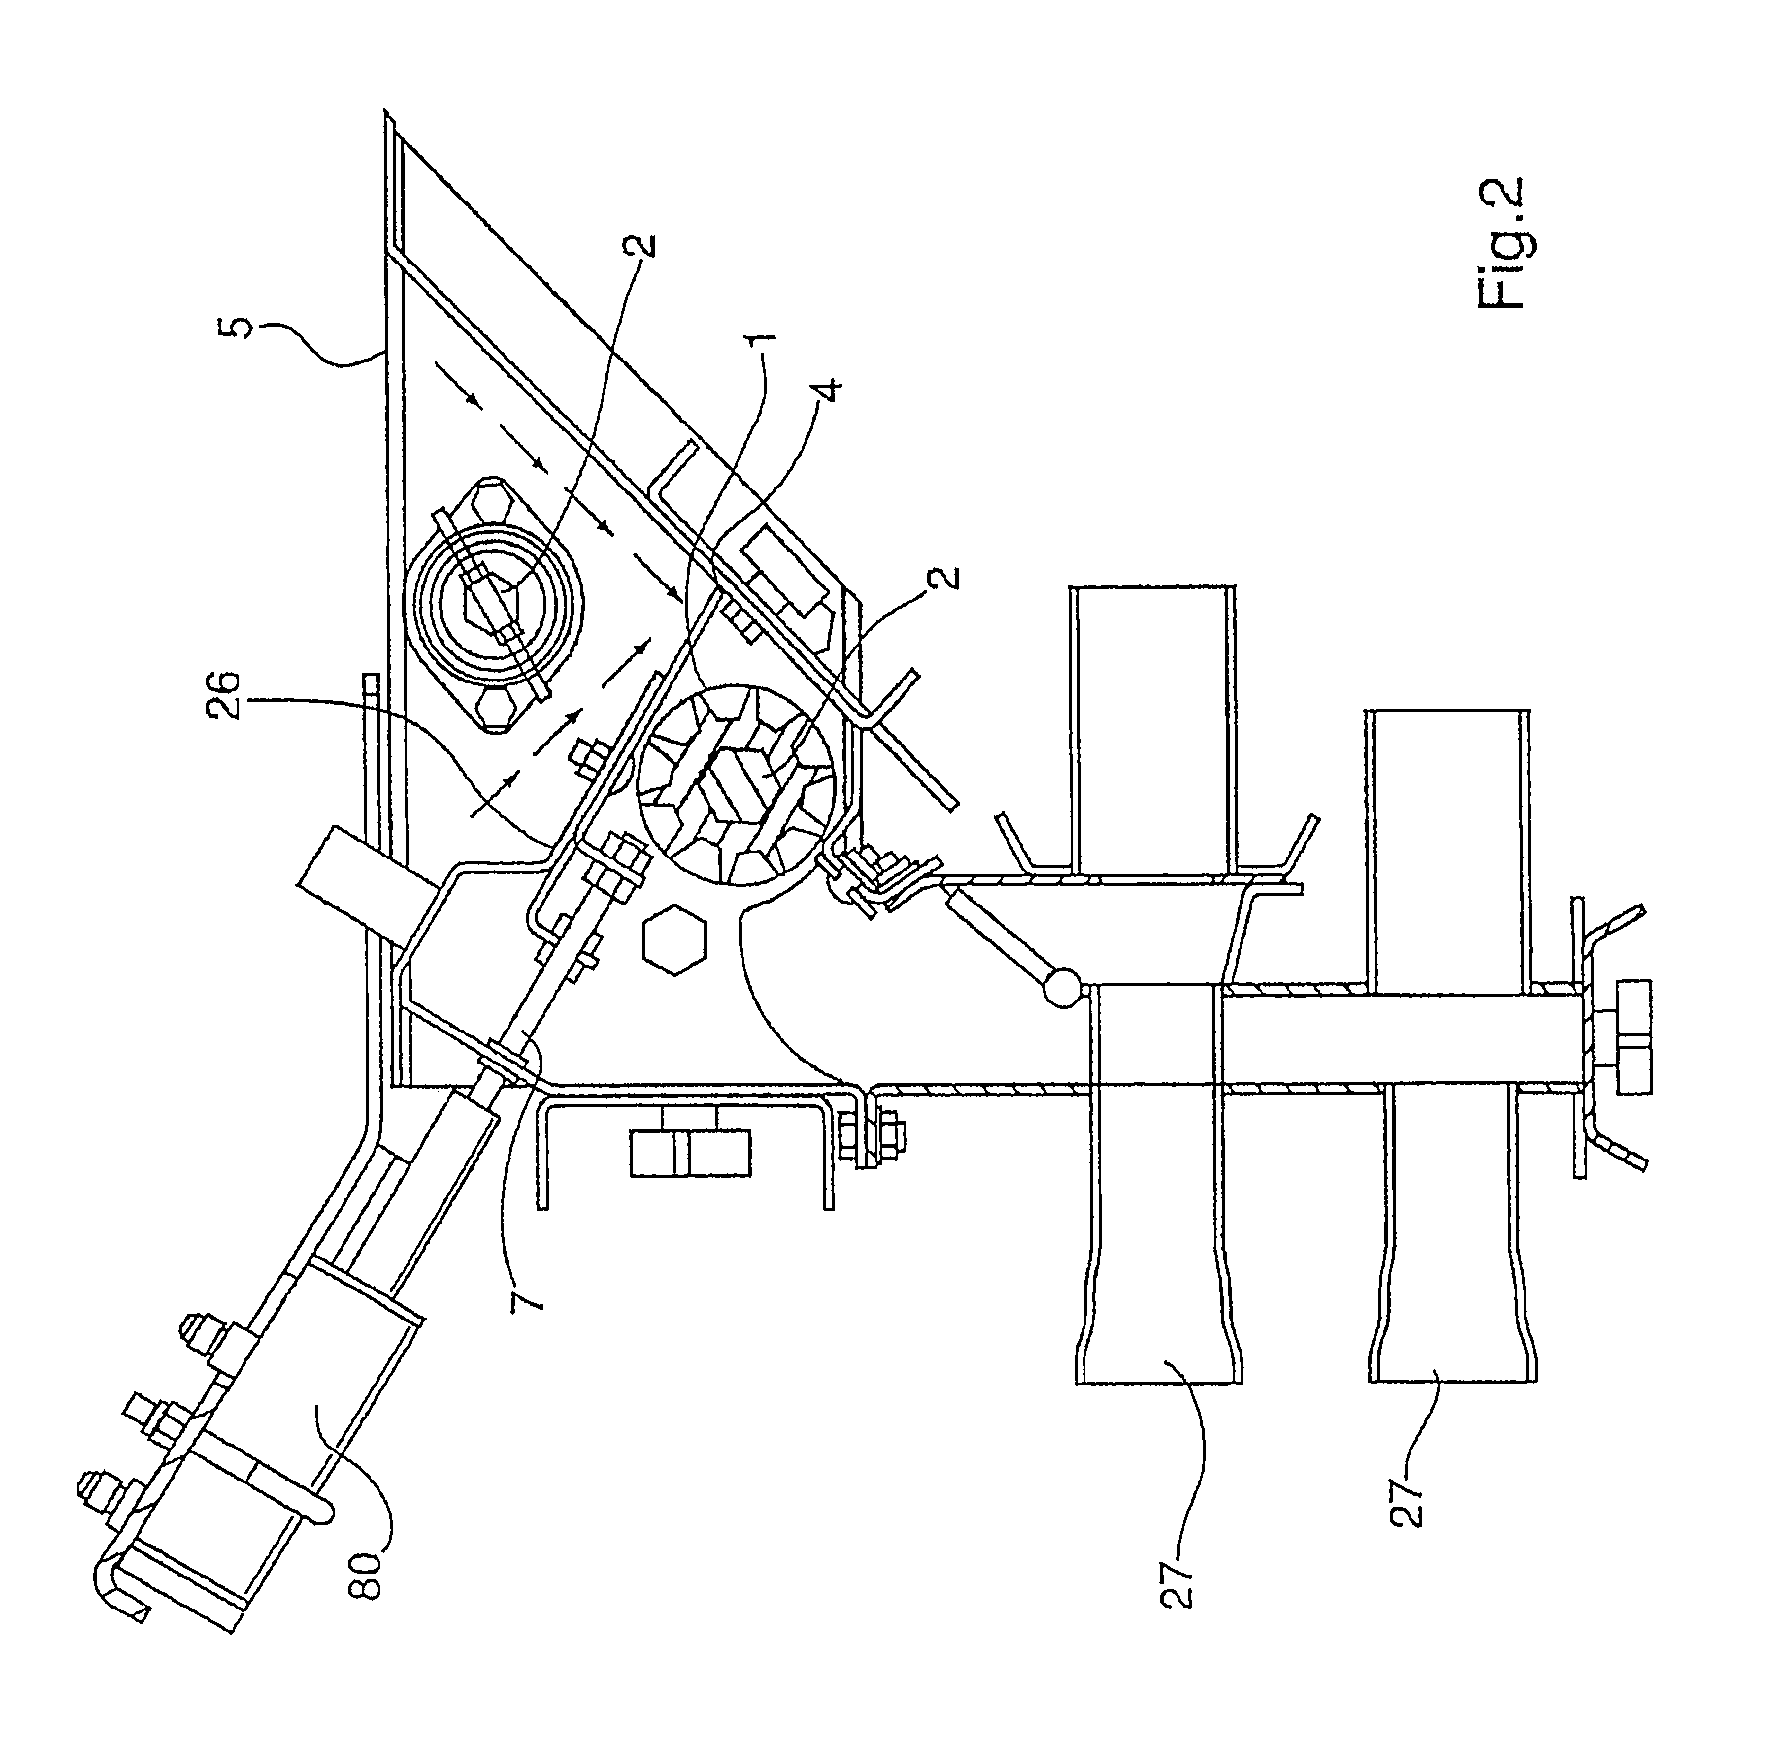 Sectional meter shut-off and agricultural implement having sectional meter shut-off